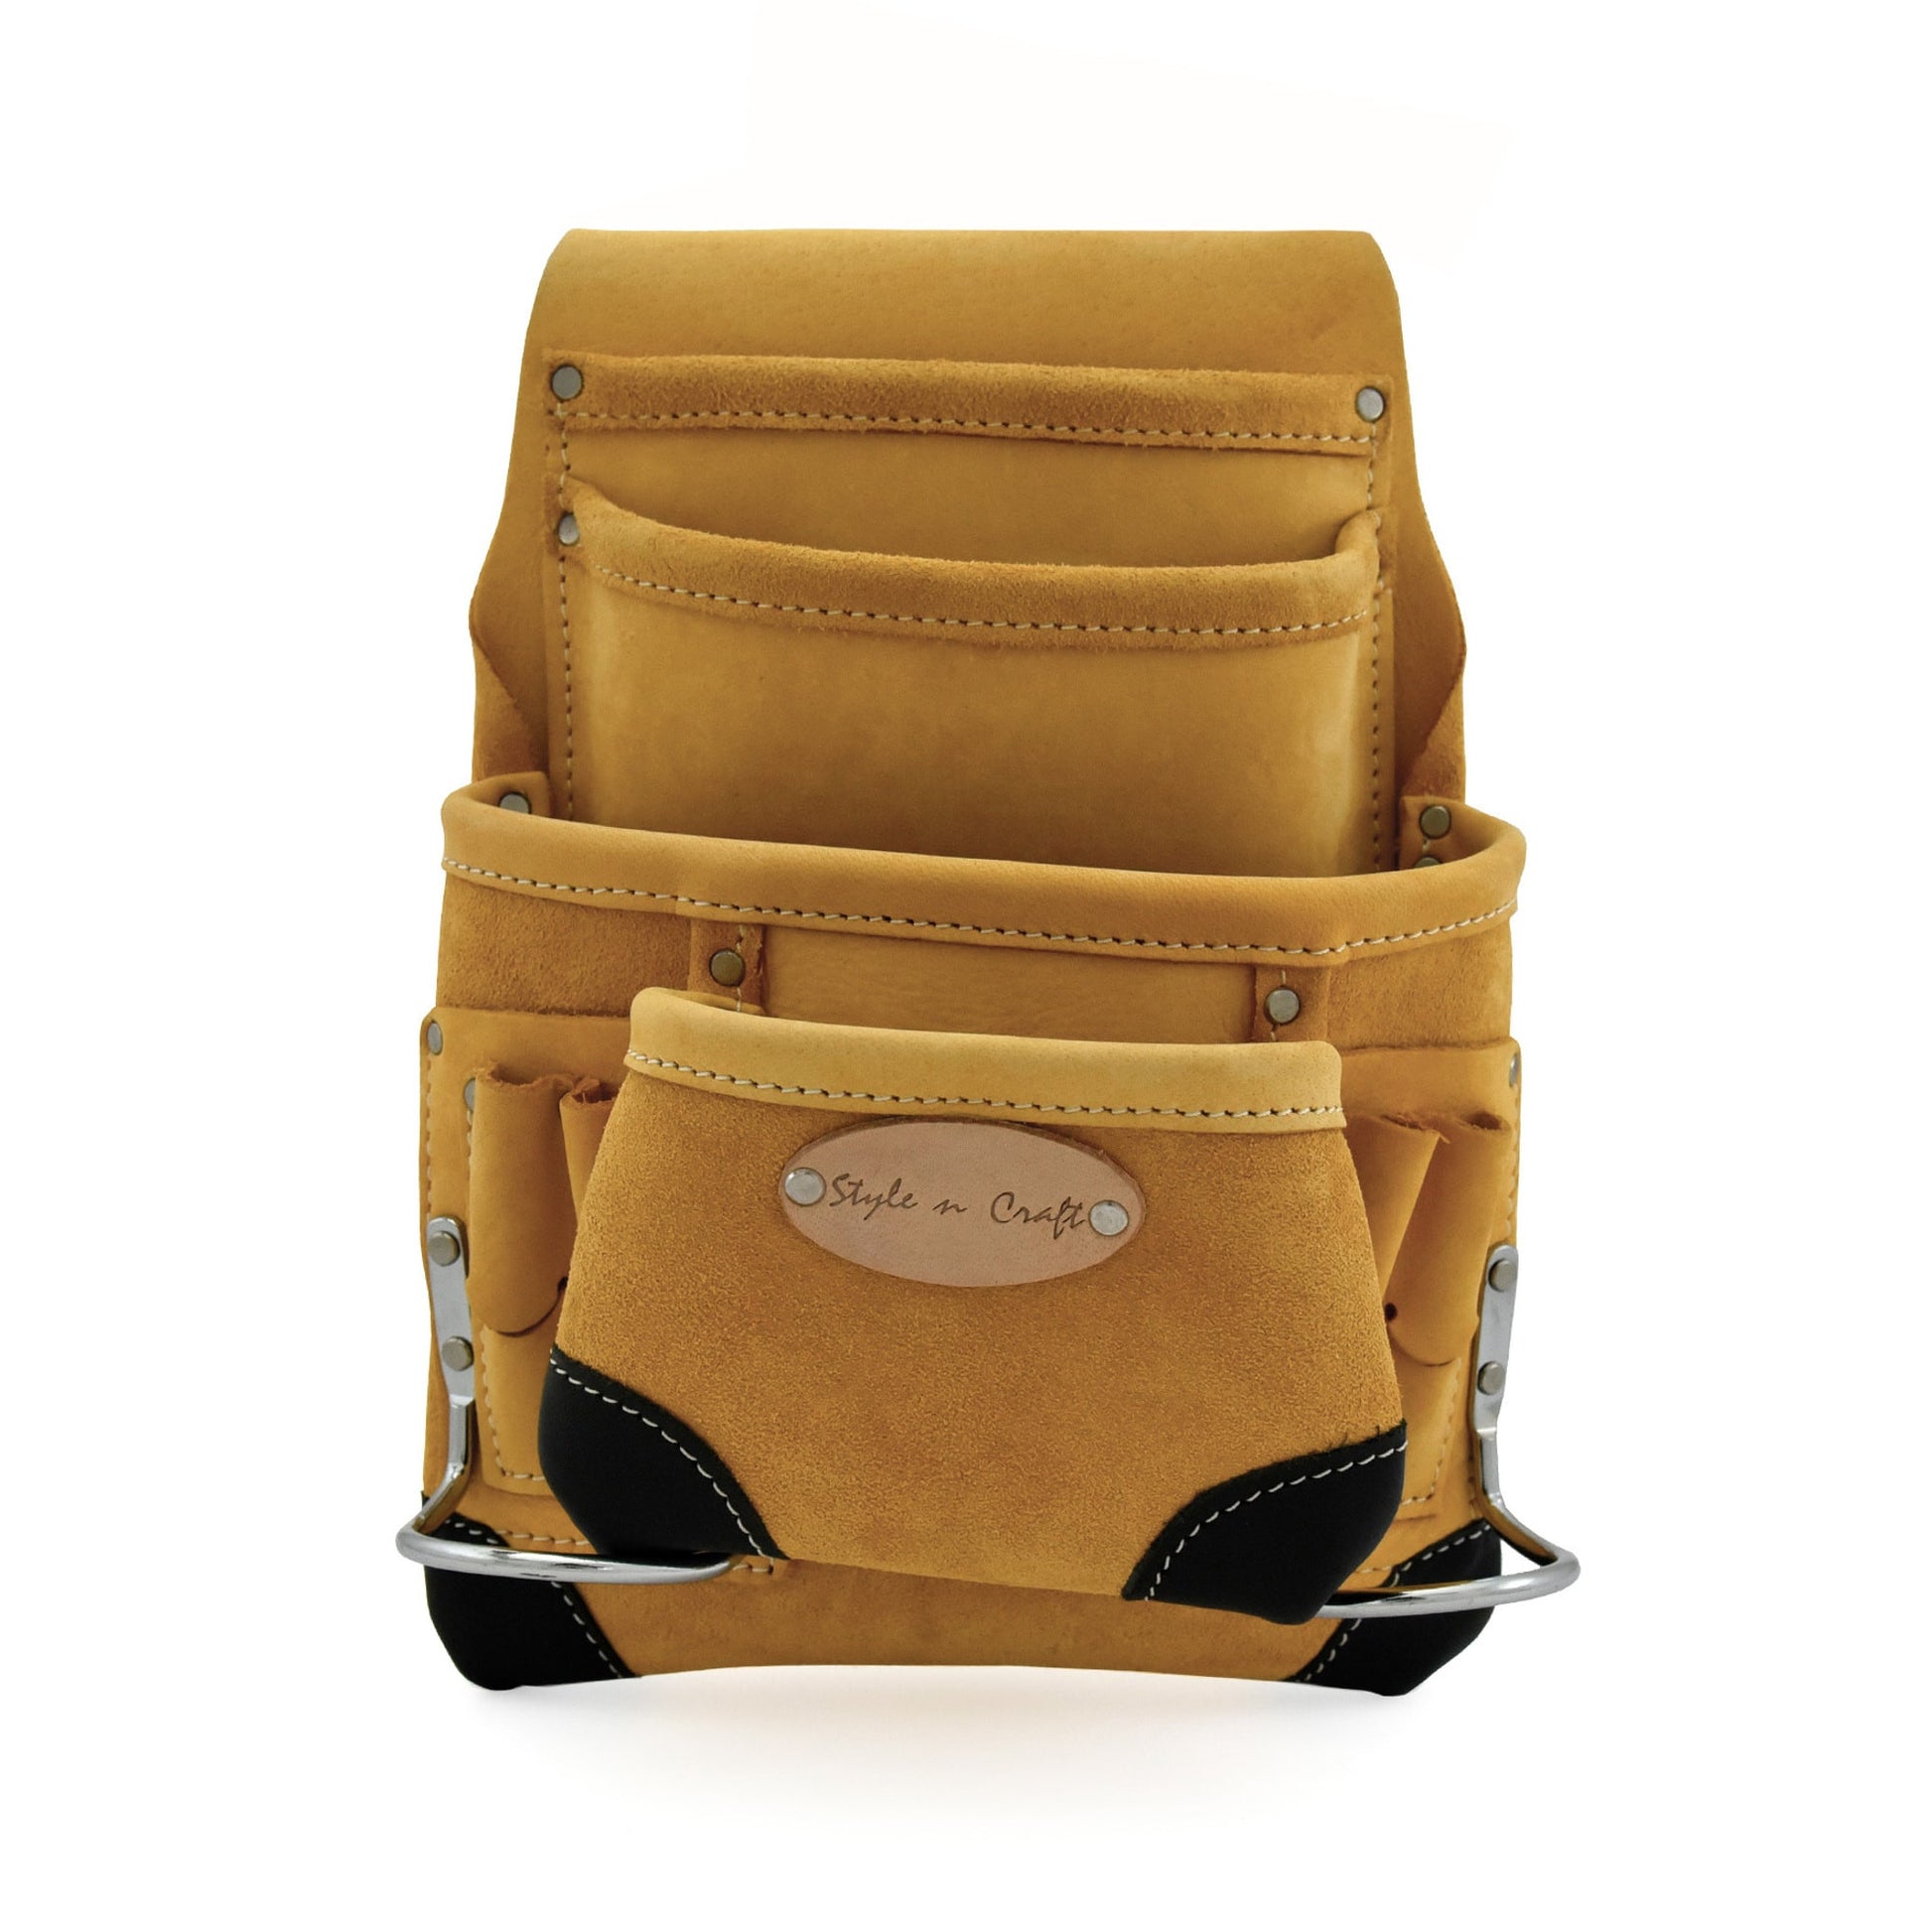 Style n Craft 93923 - 10 Pocket Carpenter's Nail & Tool Pouch in Yellow Top Grain Leather with Reinforced Corners in Black Top Grain Leather - Front View 1